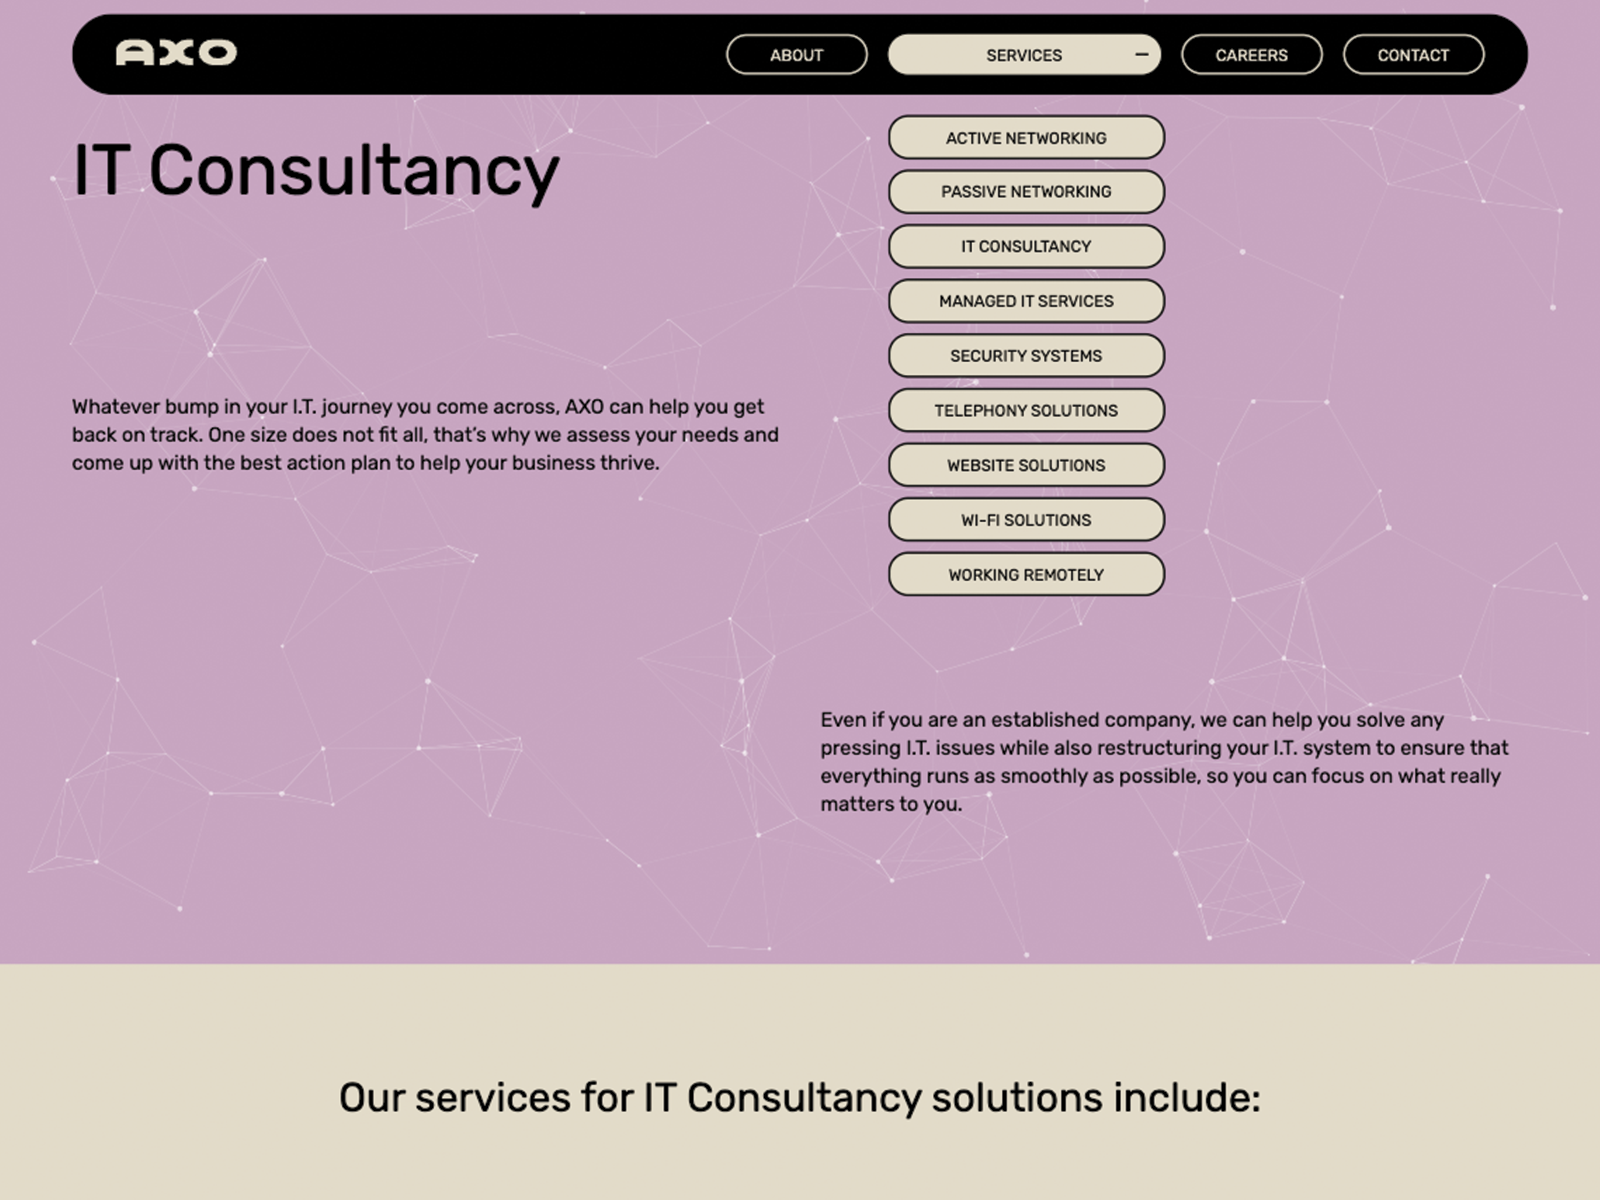 Services - IT Consultancy